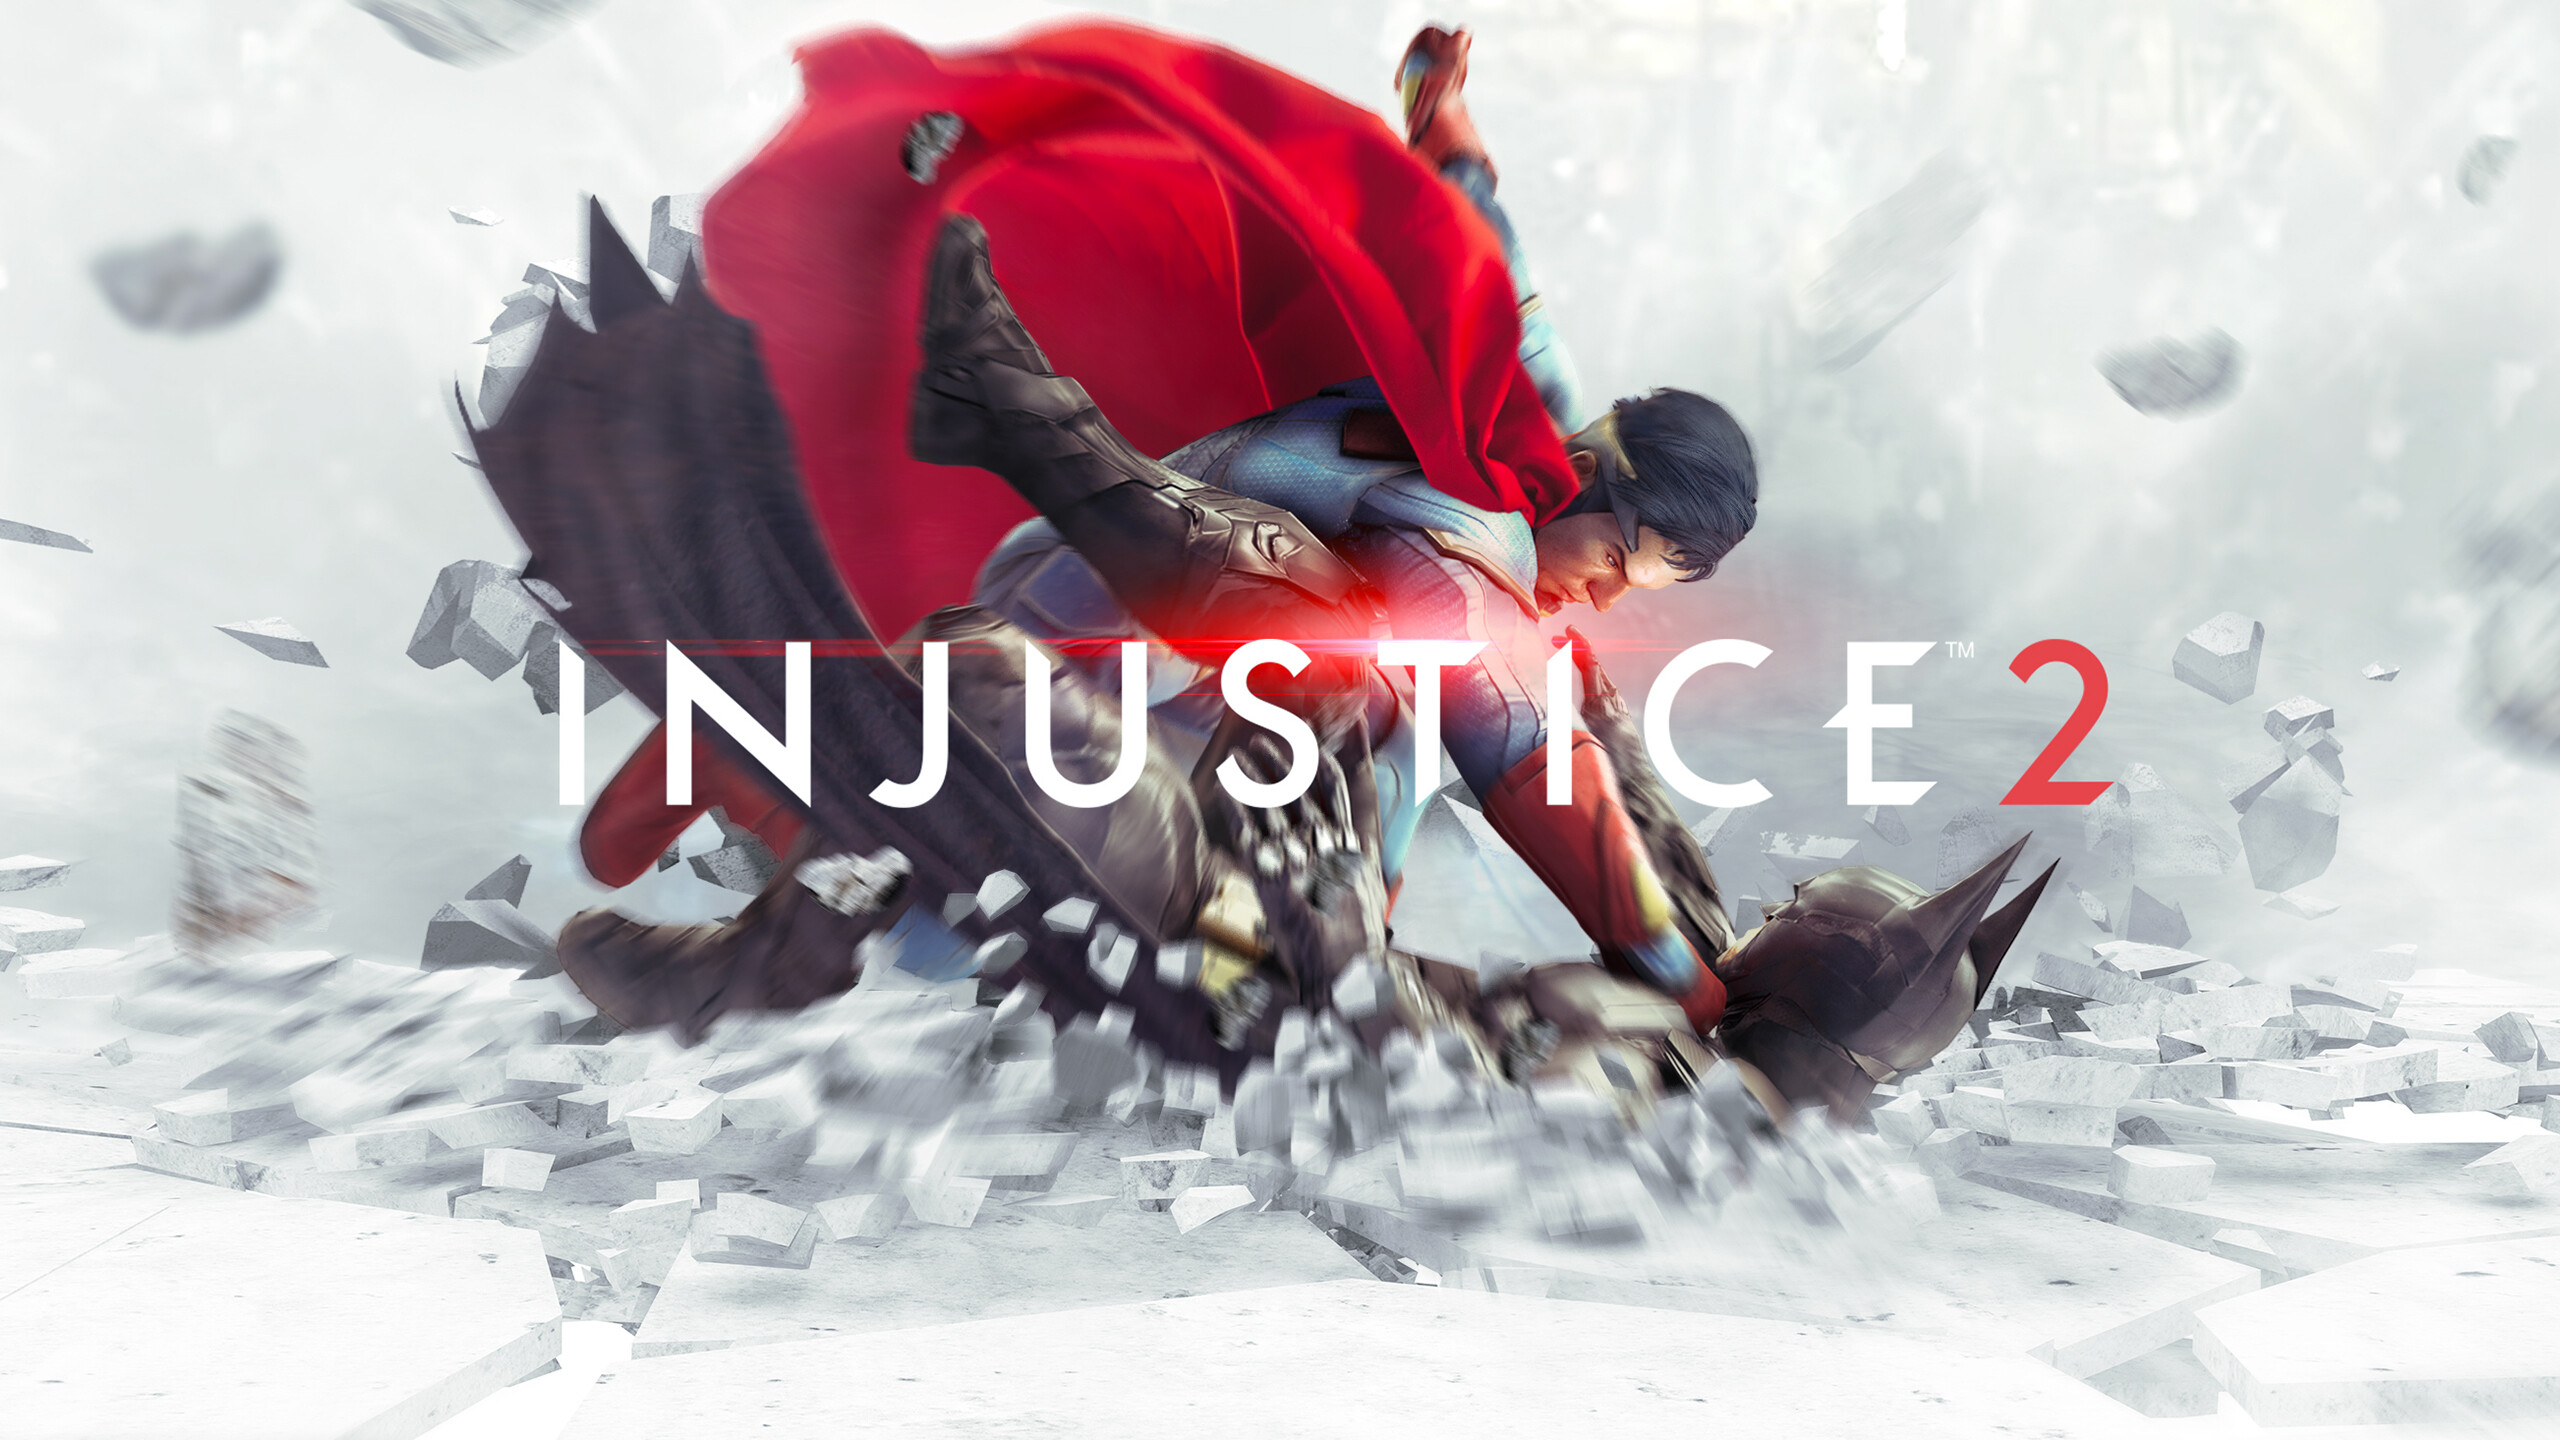 Injustice: The second game, following the same narrative five years later after the events of the first game set in the same universe of the Regime where Batman's insurgency rebuilds society after Superman's fall. 2560x1440 HD Background.